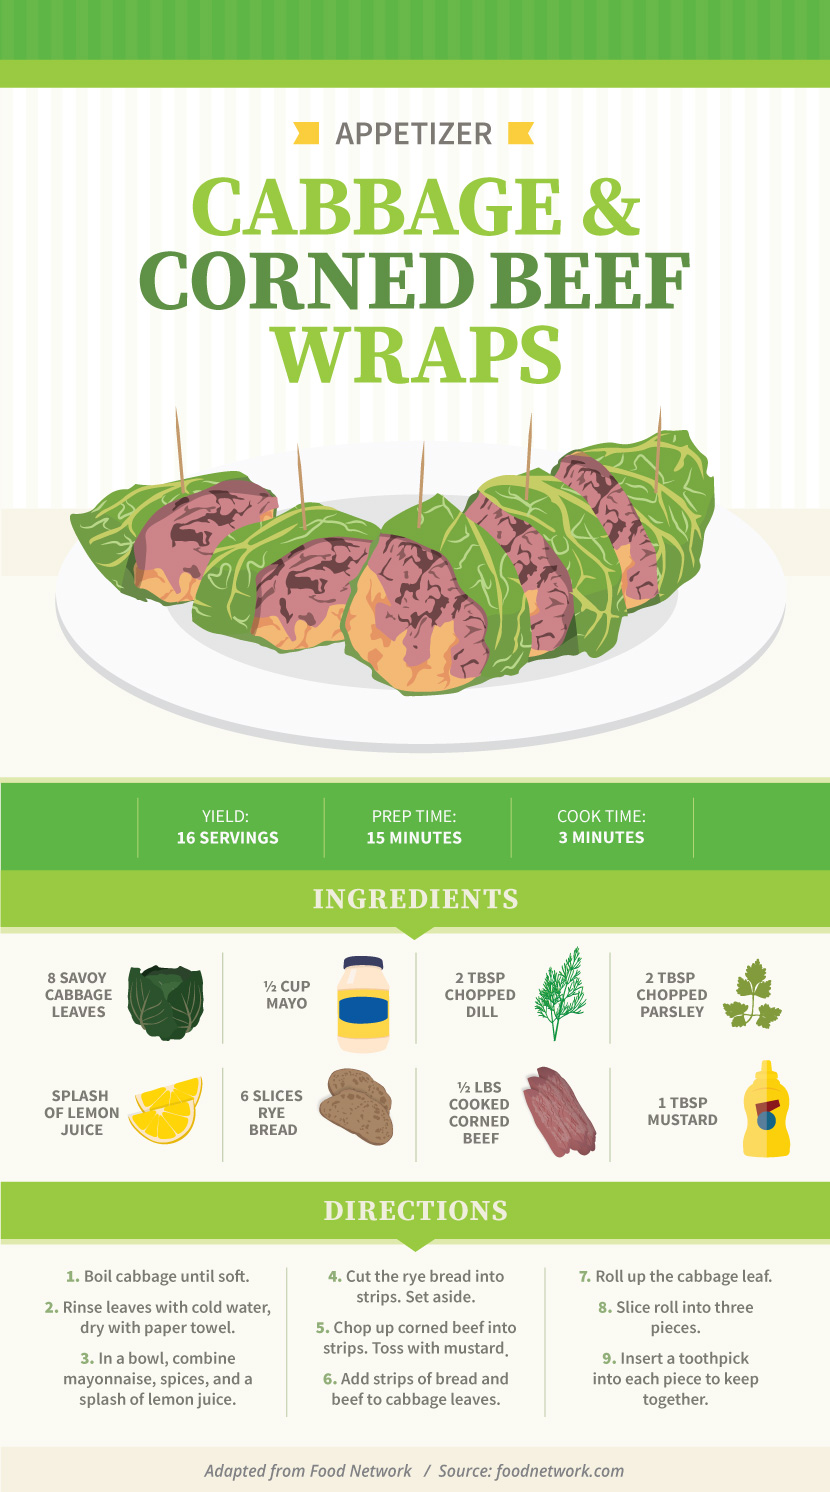 Cabbage and Corned Beef Wraps - Fun and Easy St. Patrick’s Day Recipes